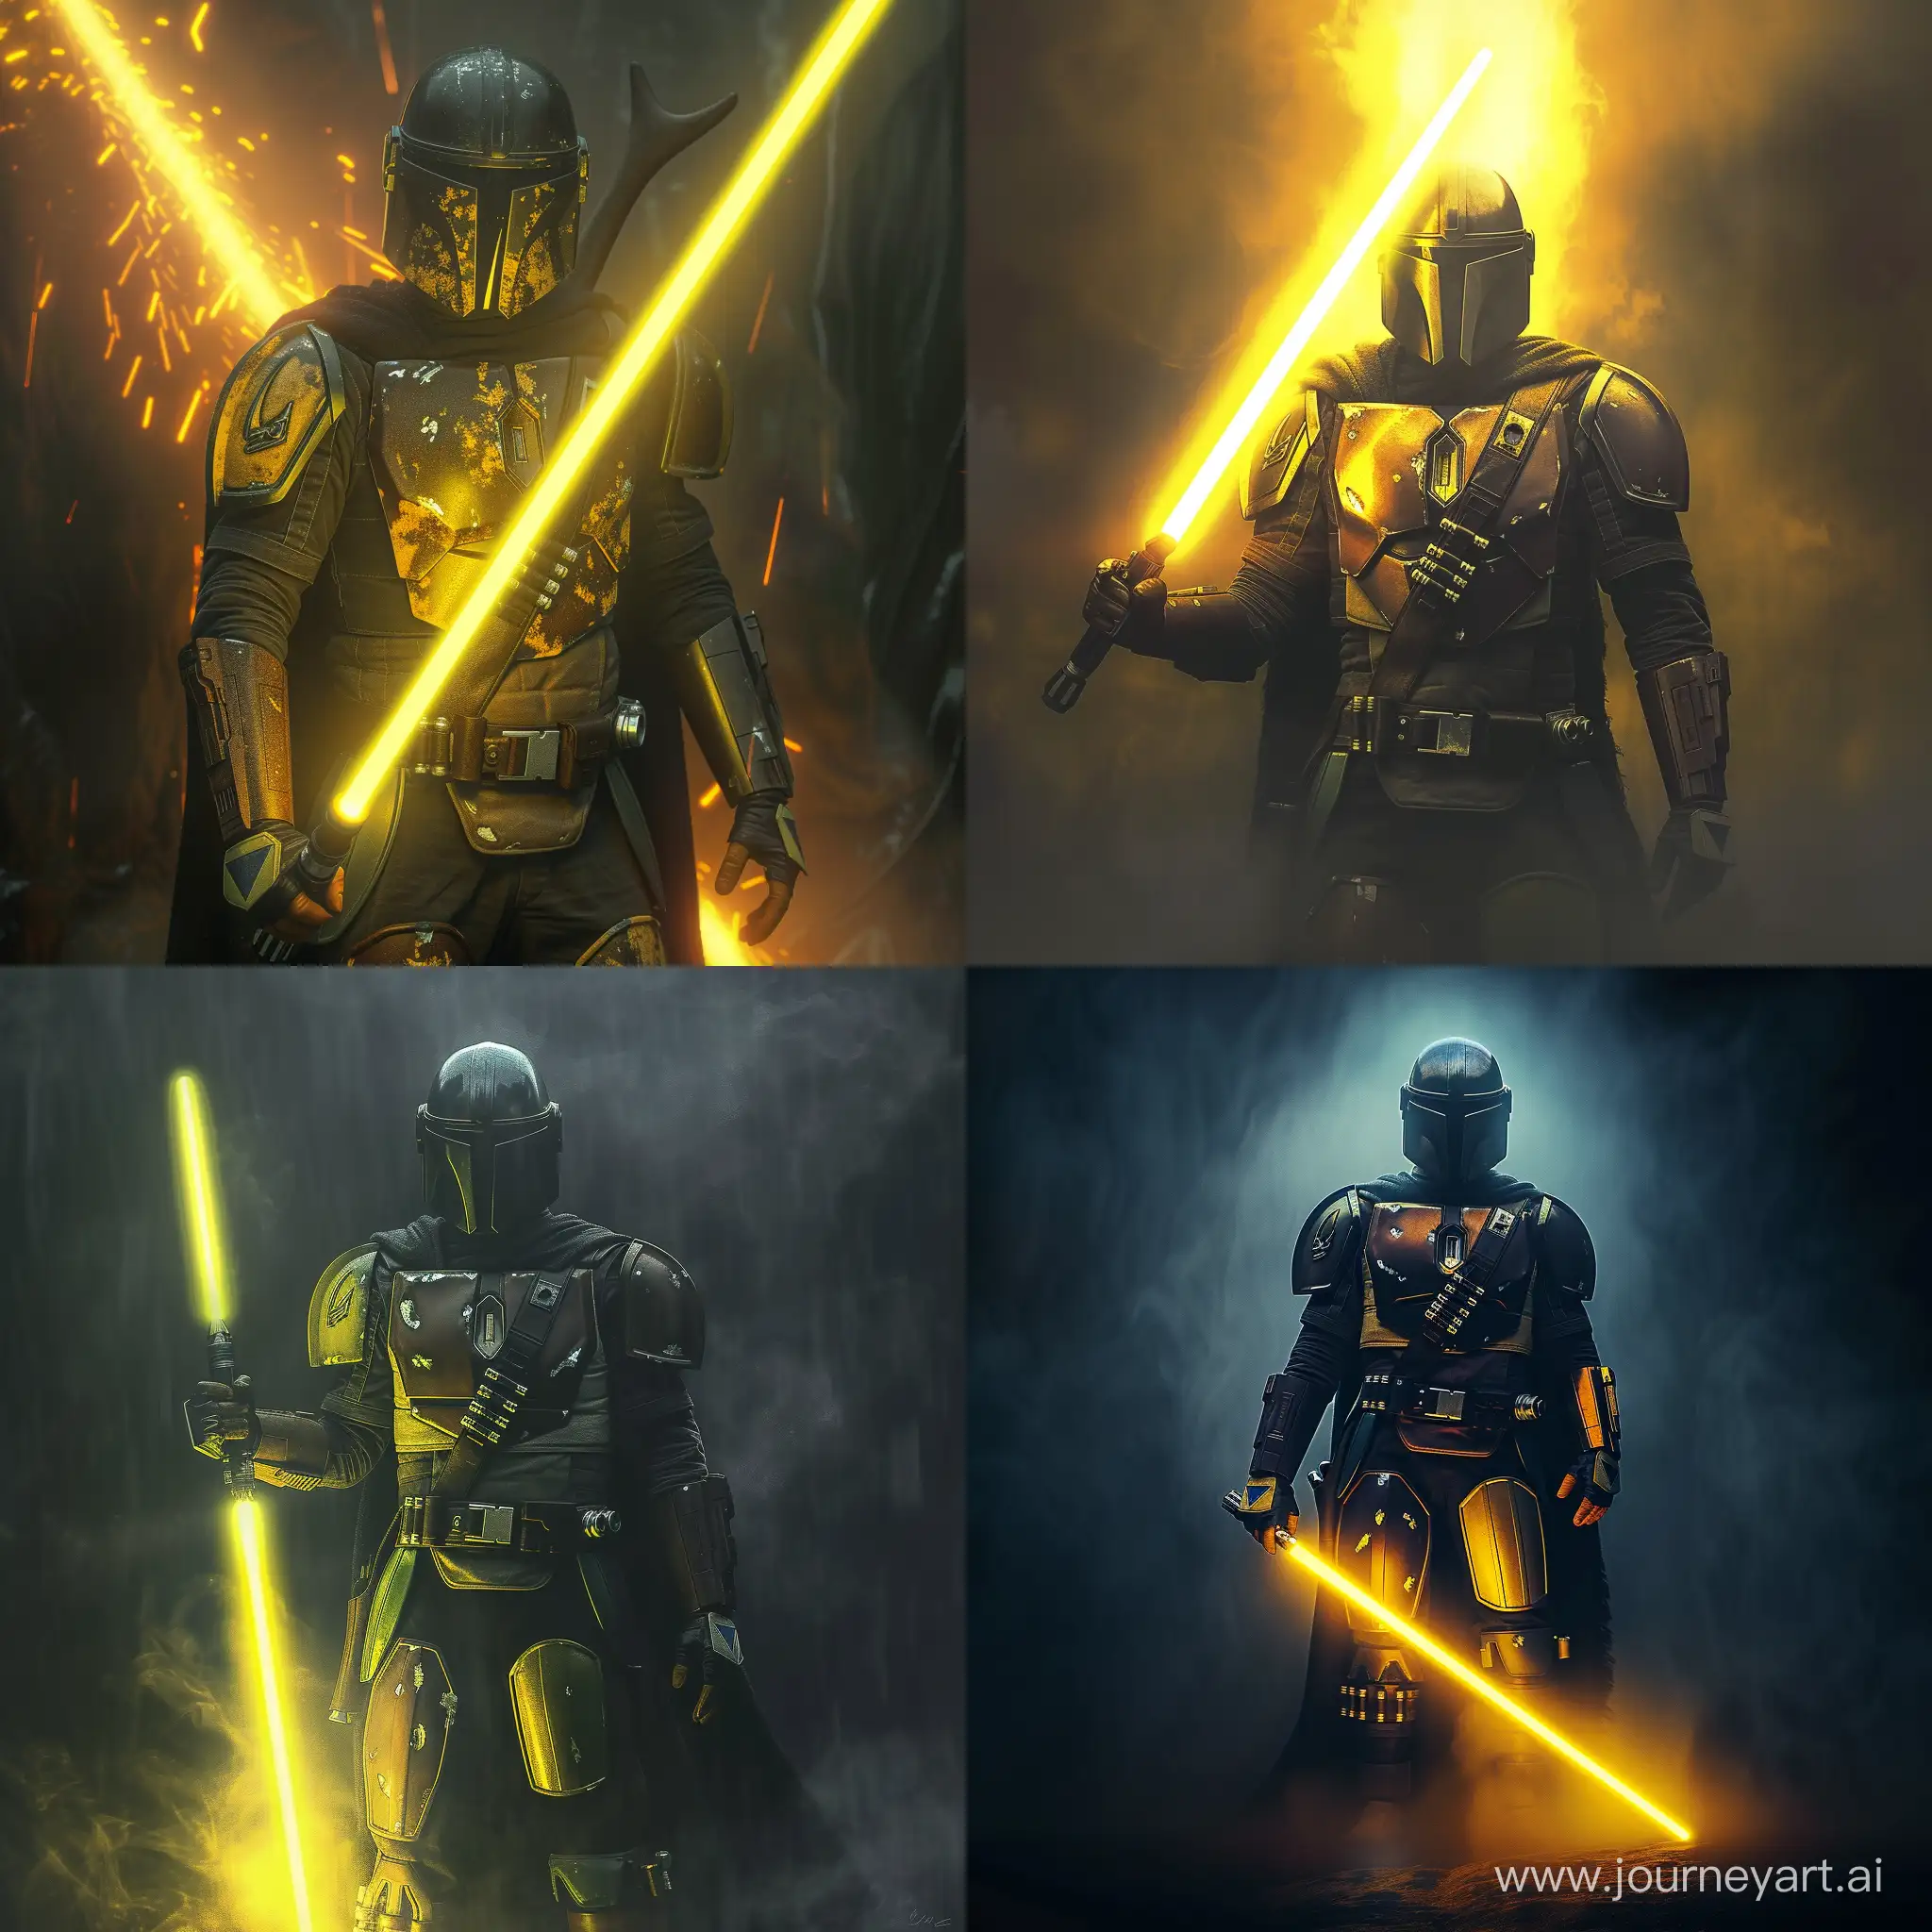 A Mandalorian stands, holding a yellow lightsaber, darkness and light behind him